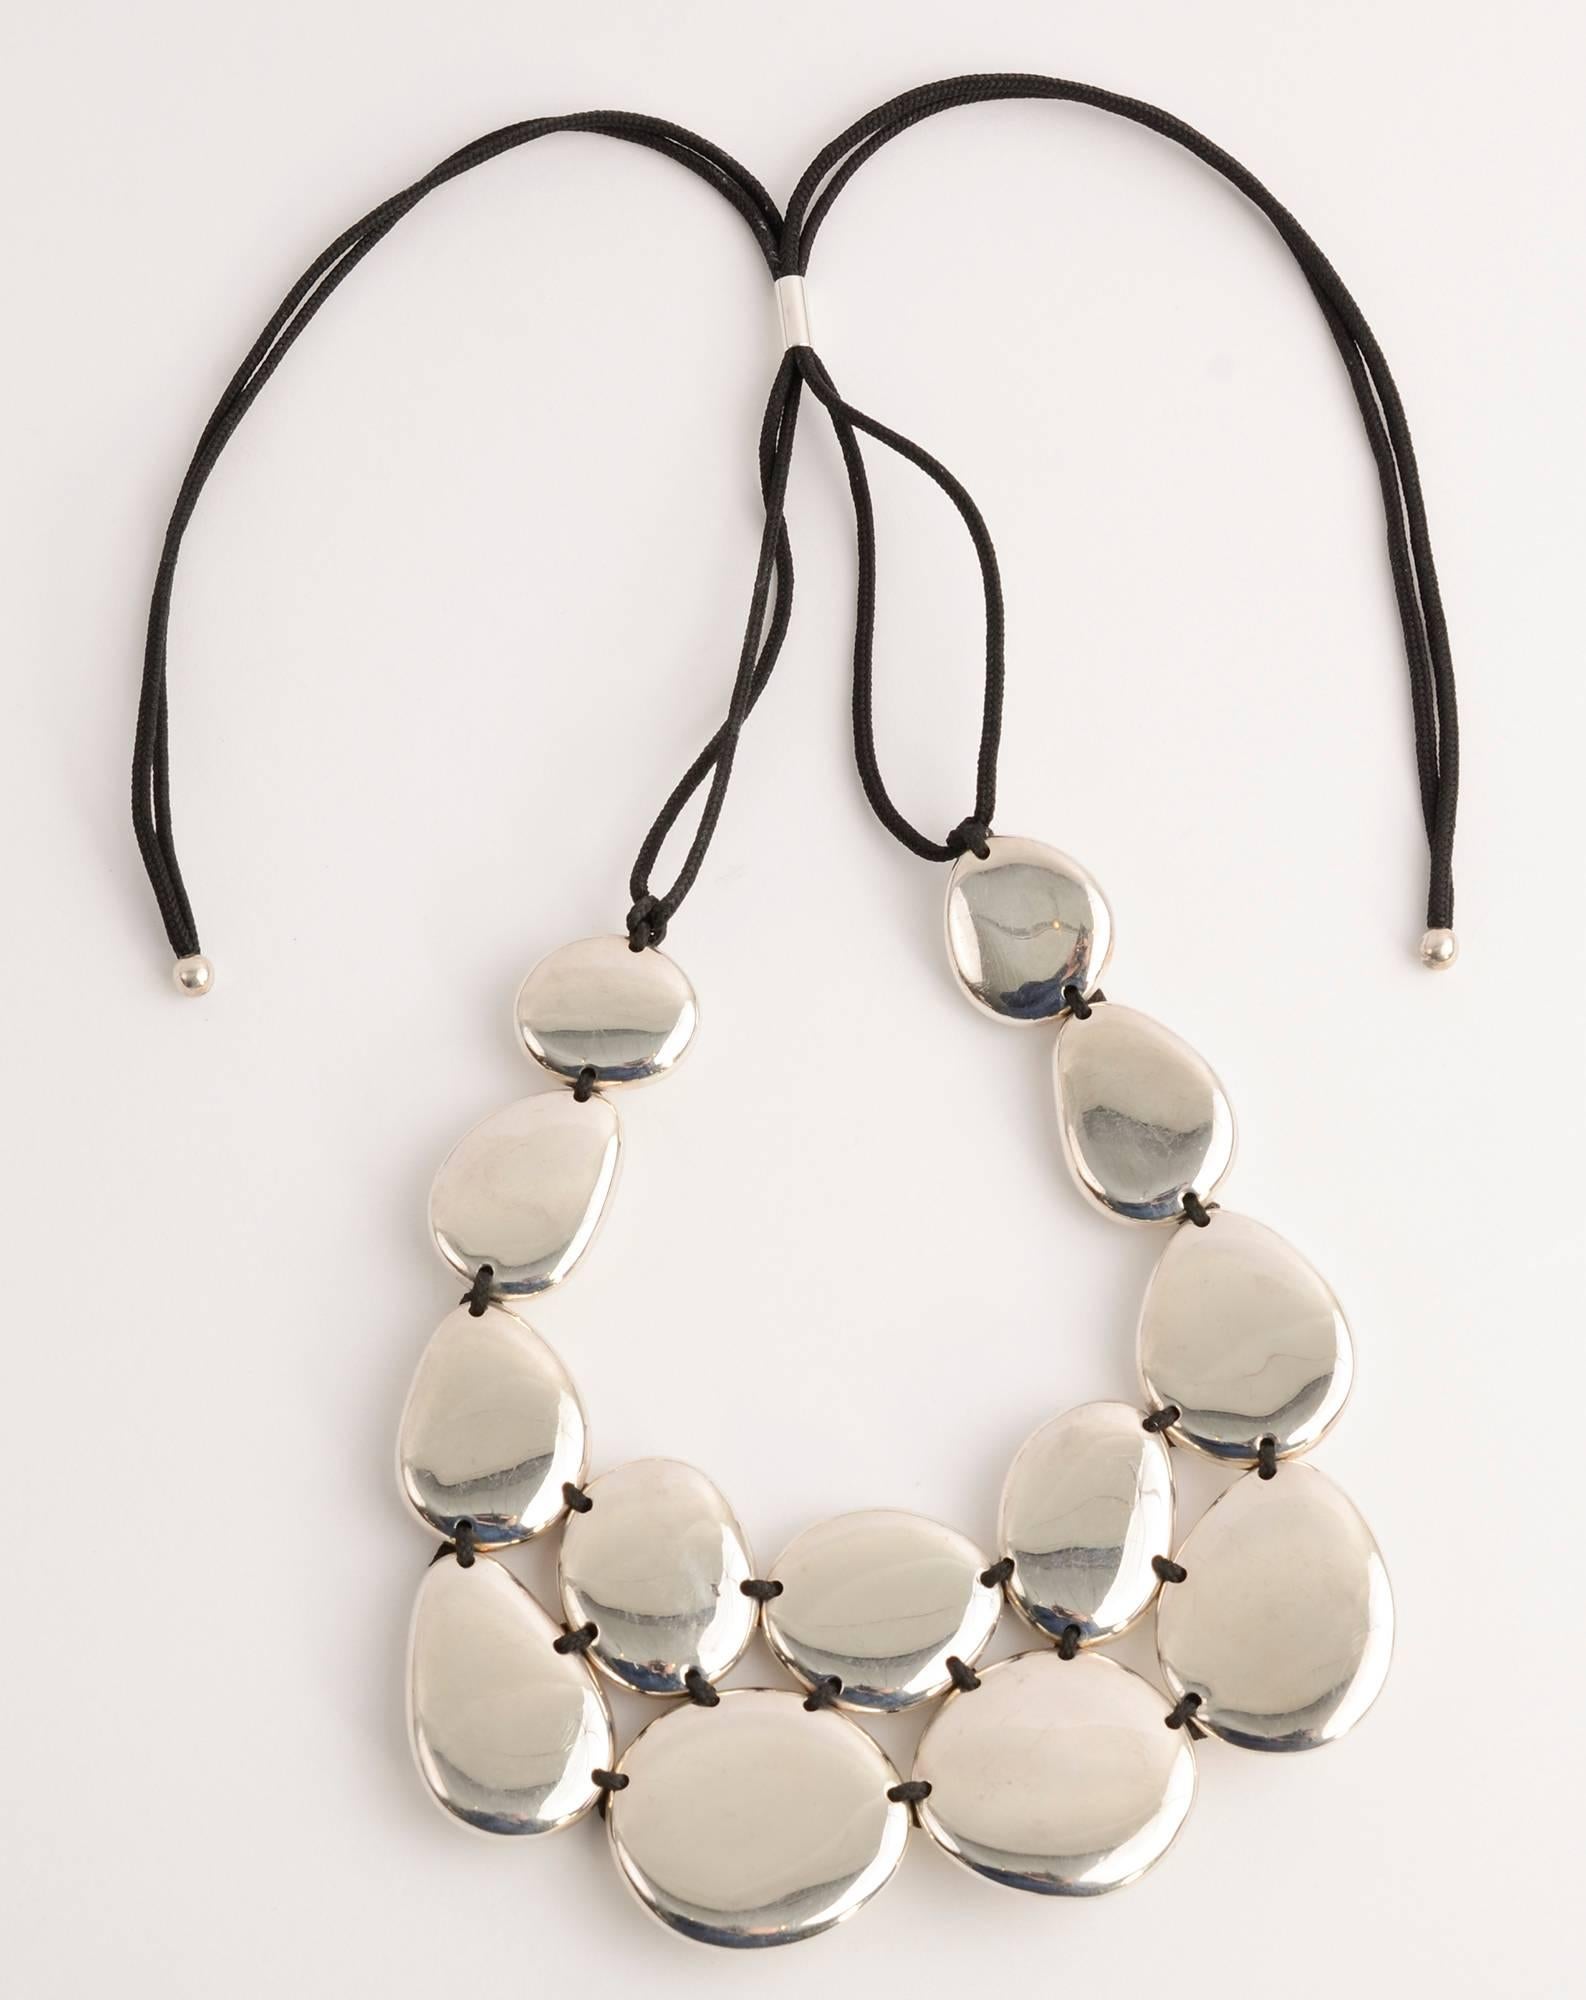 Stylish and versatile silver necklace by Tane, known as Mexico's equivalent of Tiffany.
The necklace is made of 13 silver medallions of varying shapes and sizes. They are strung on a woven cloth cord. The knotted intersections with which they are